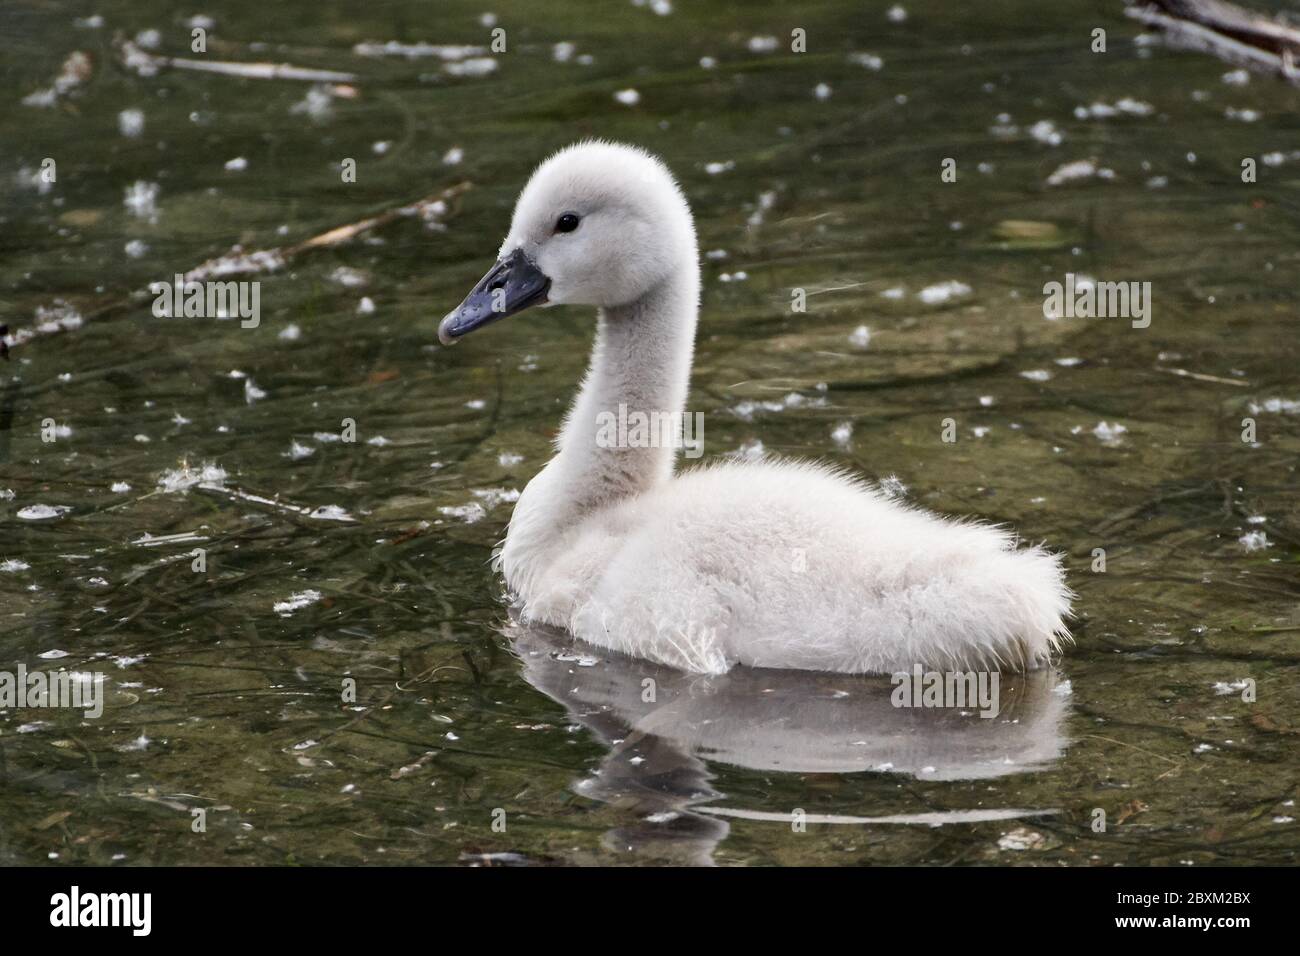 Close-up of a mute swan cygnet (Cygnus olor) swimming in water with pollen on the surface Stock Photo